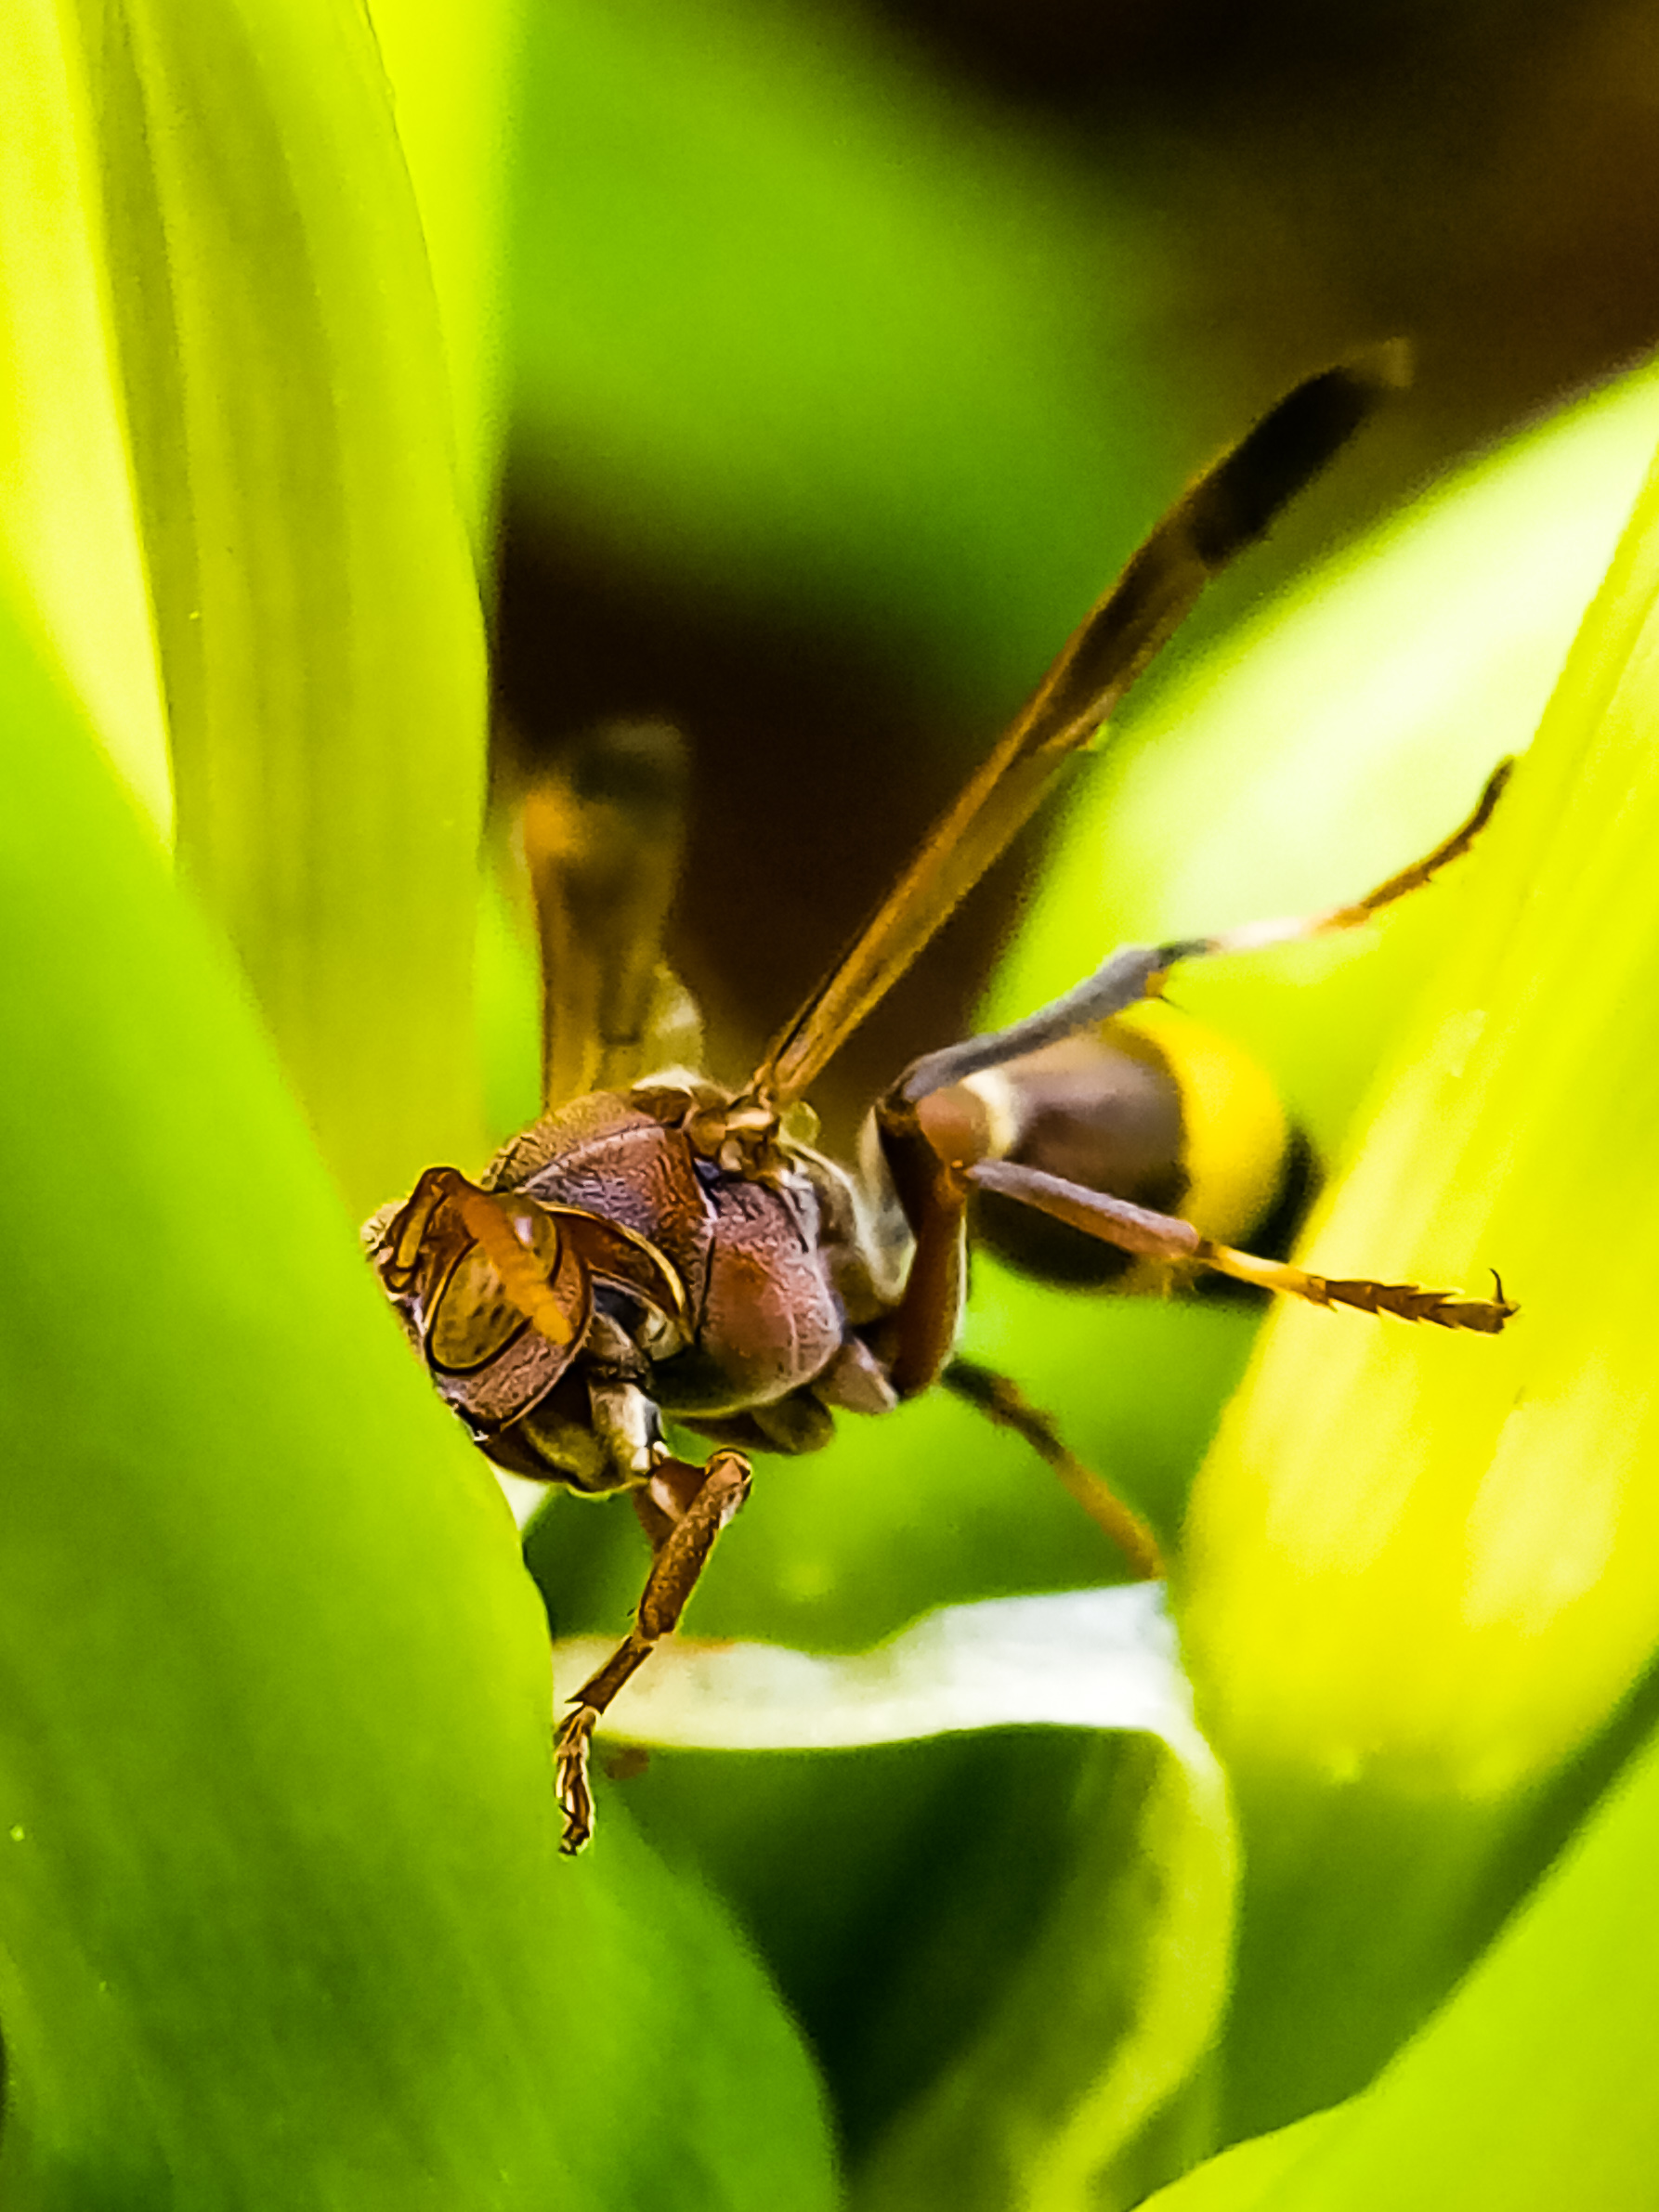 Honey bee on a plant leaf